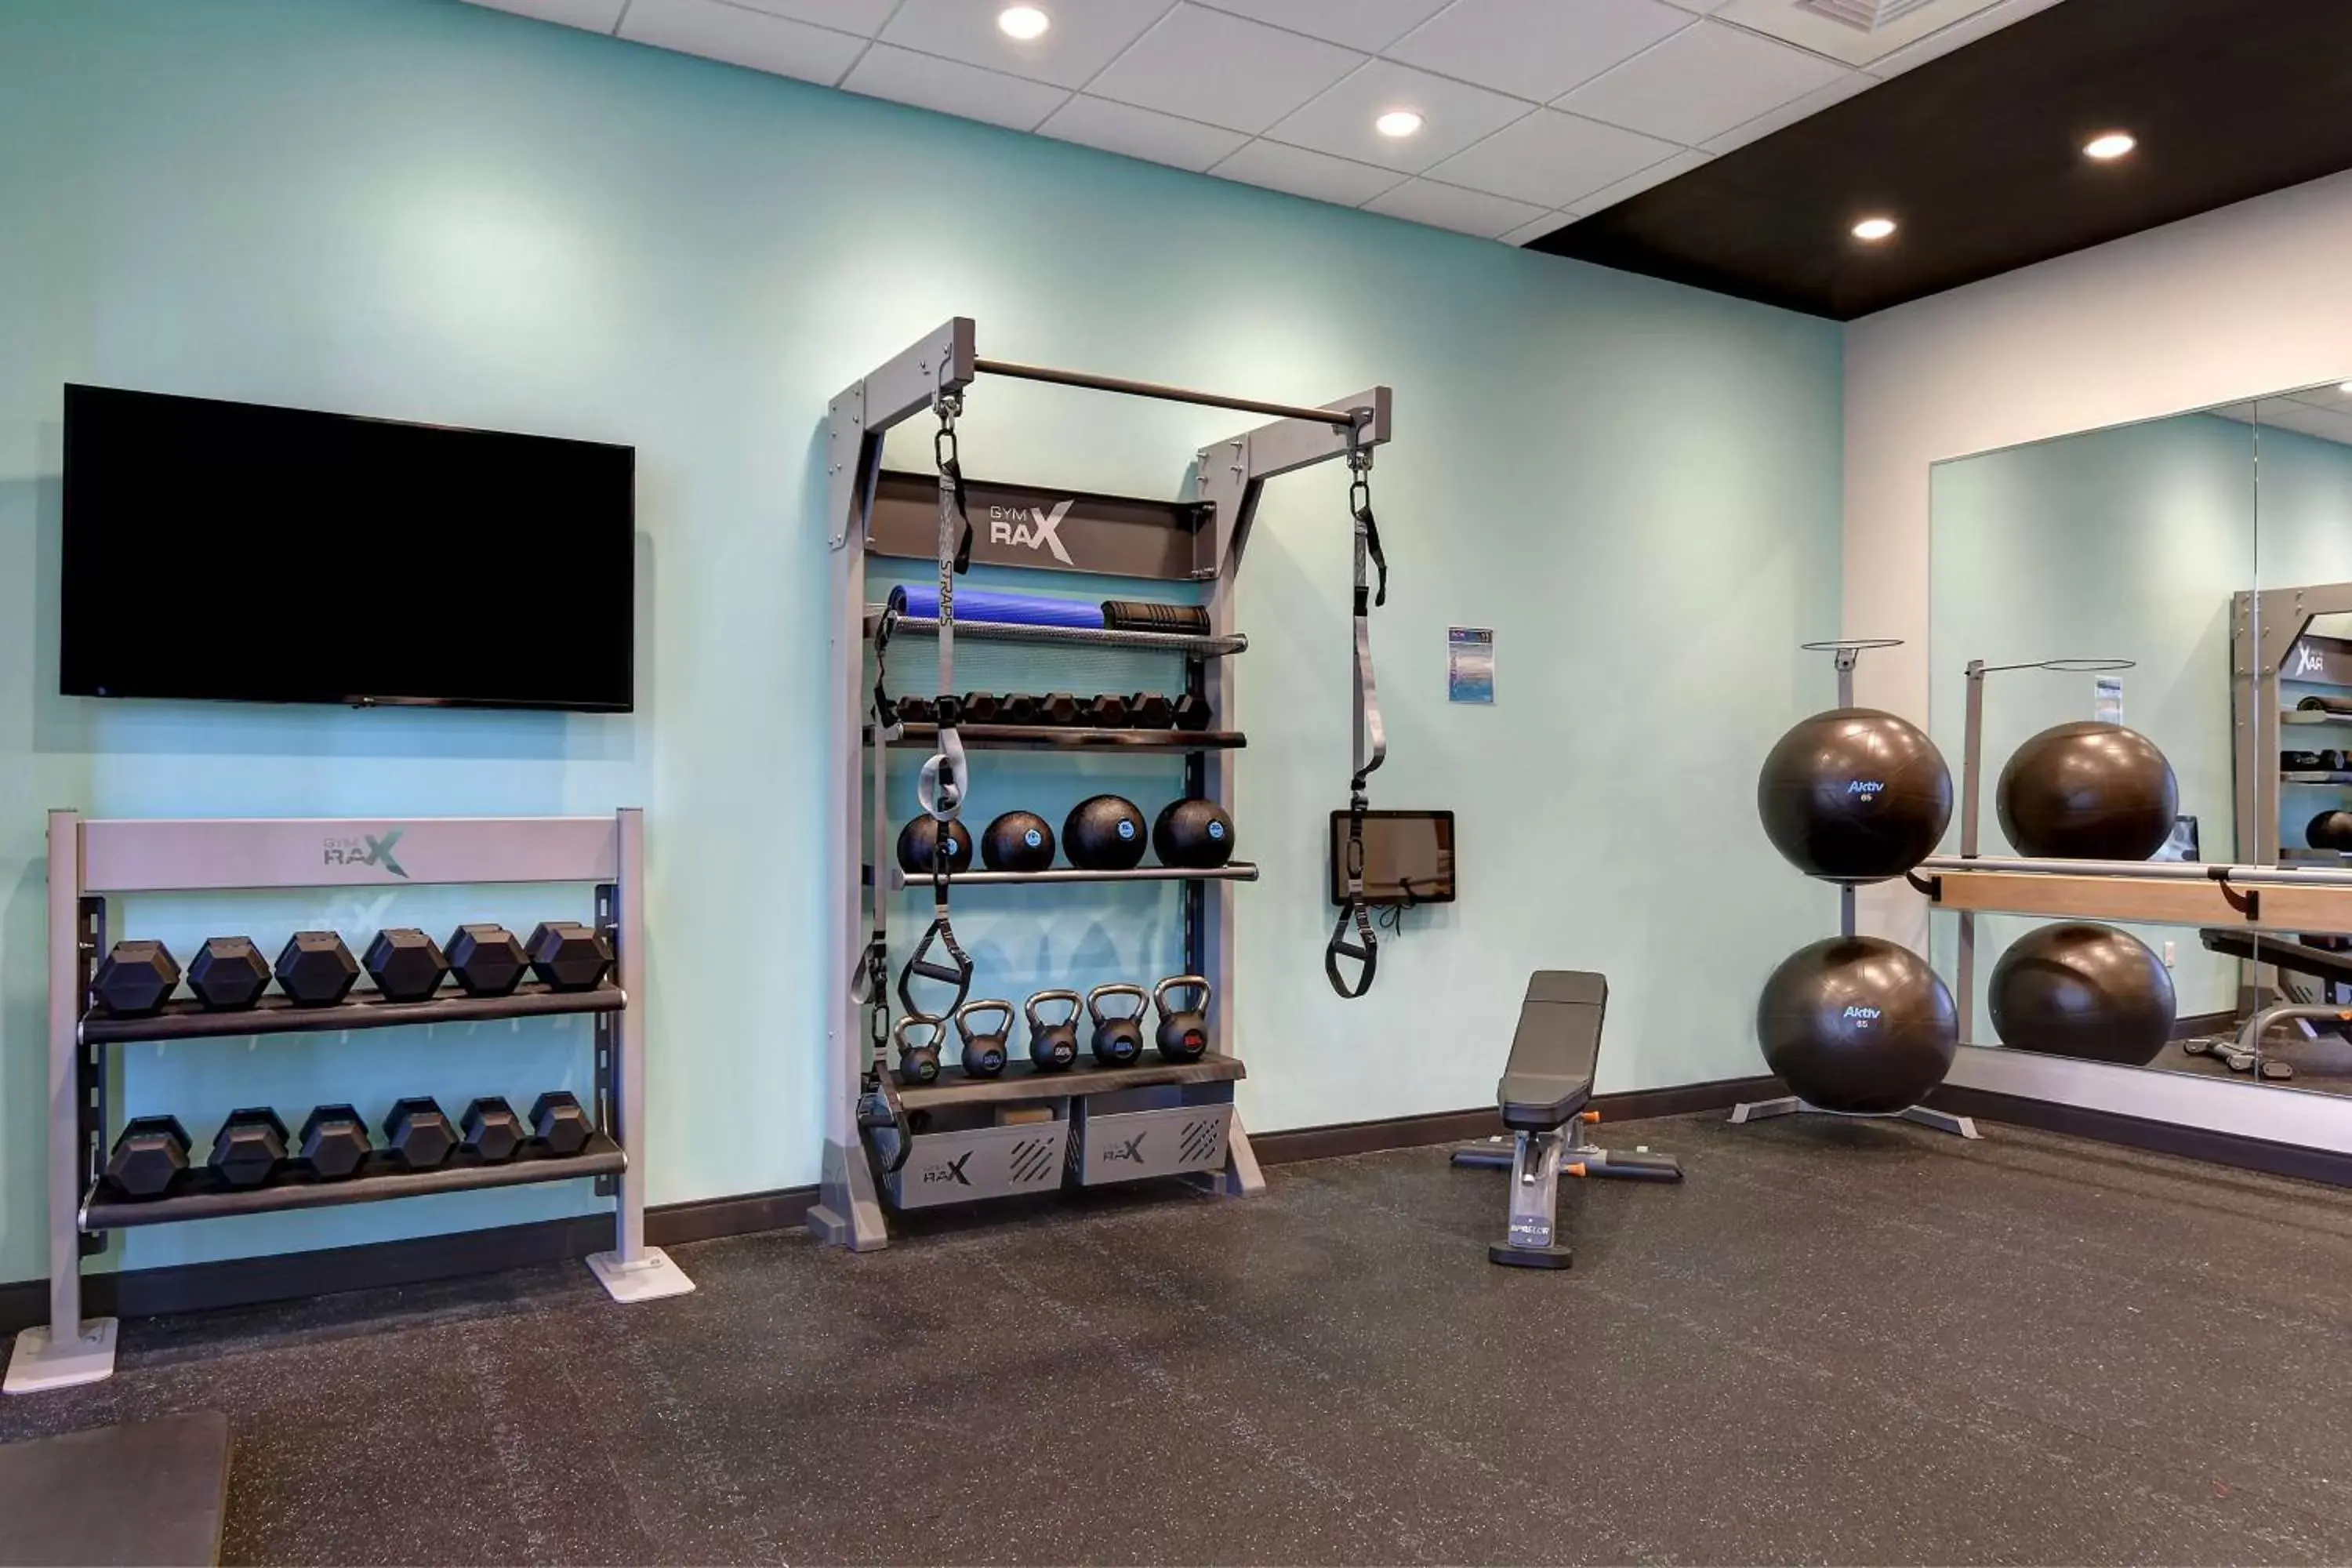 Fitness centre/facilities, Fitness Center/Facilities in Tru by Hilton Lithia Springs, GA